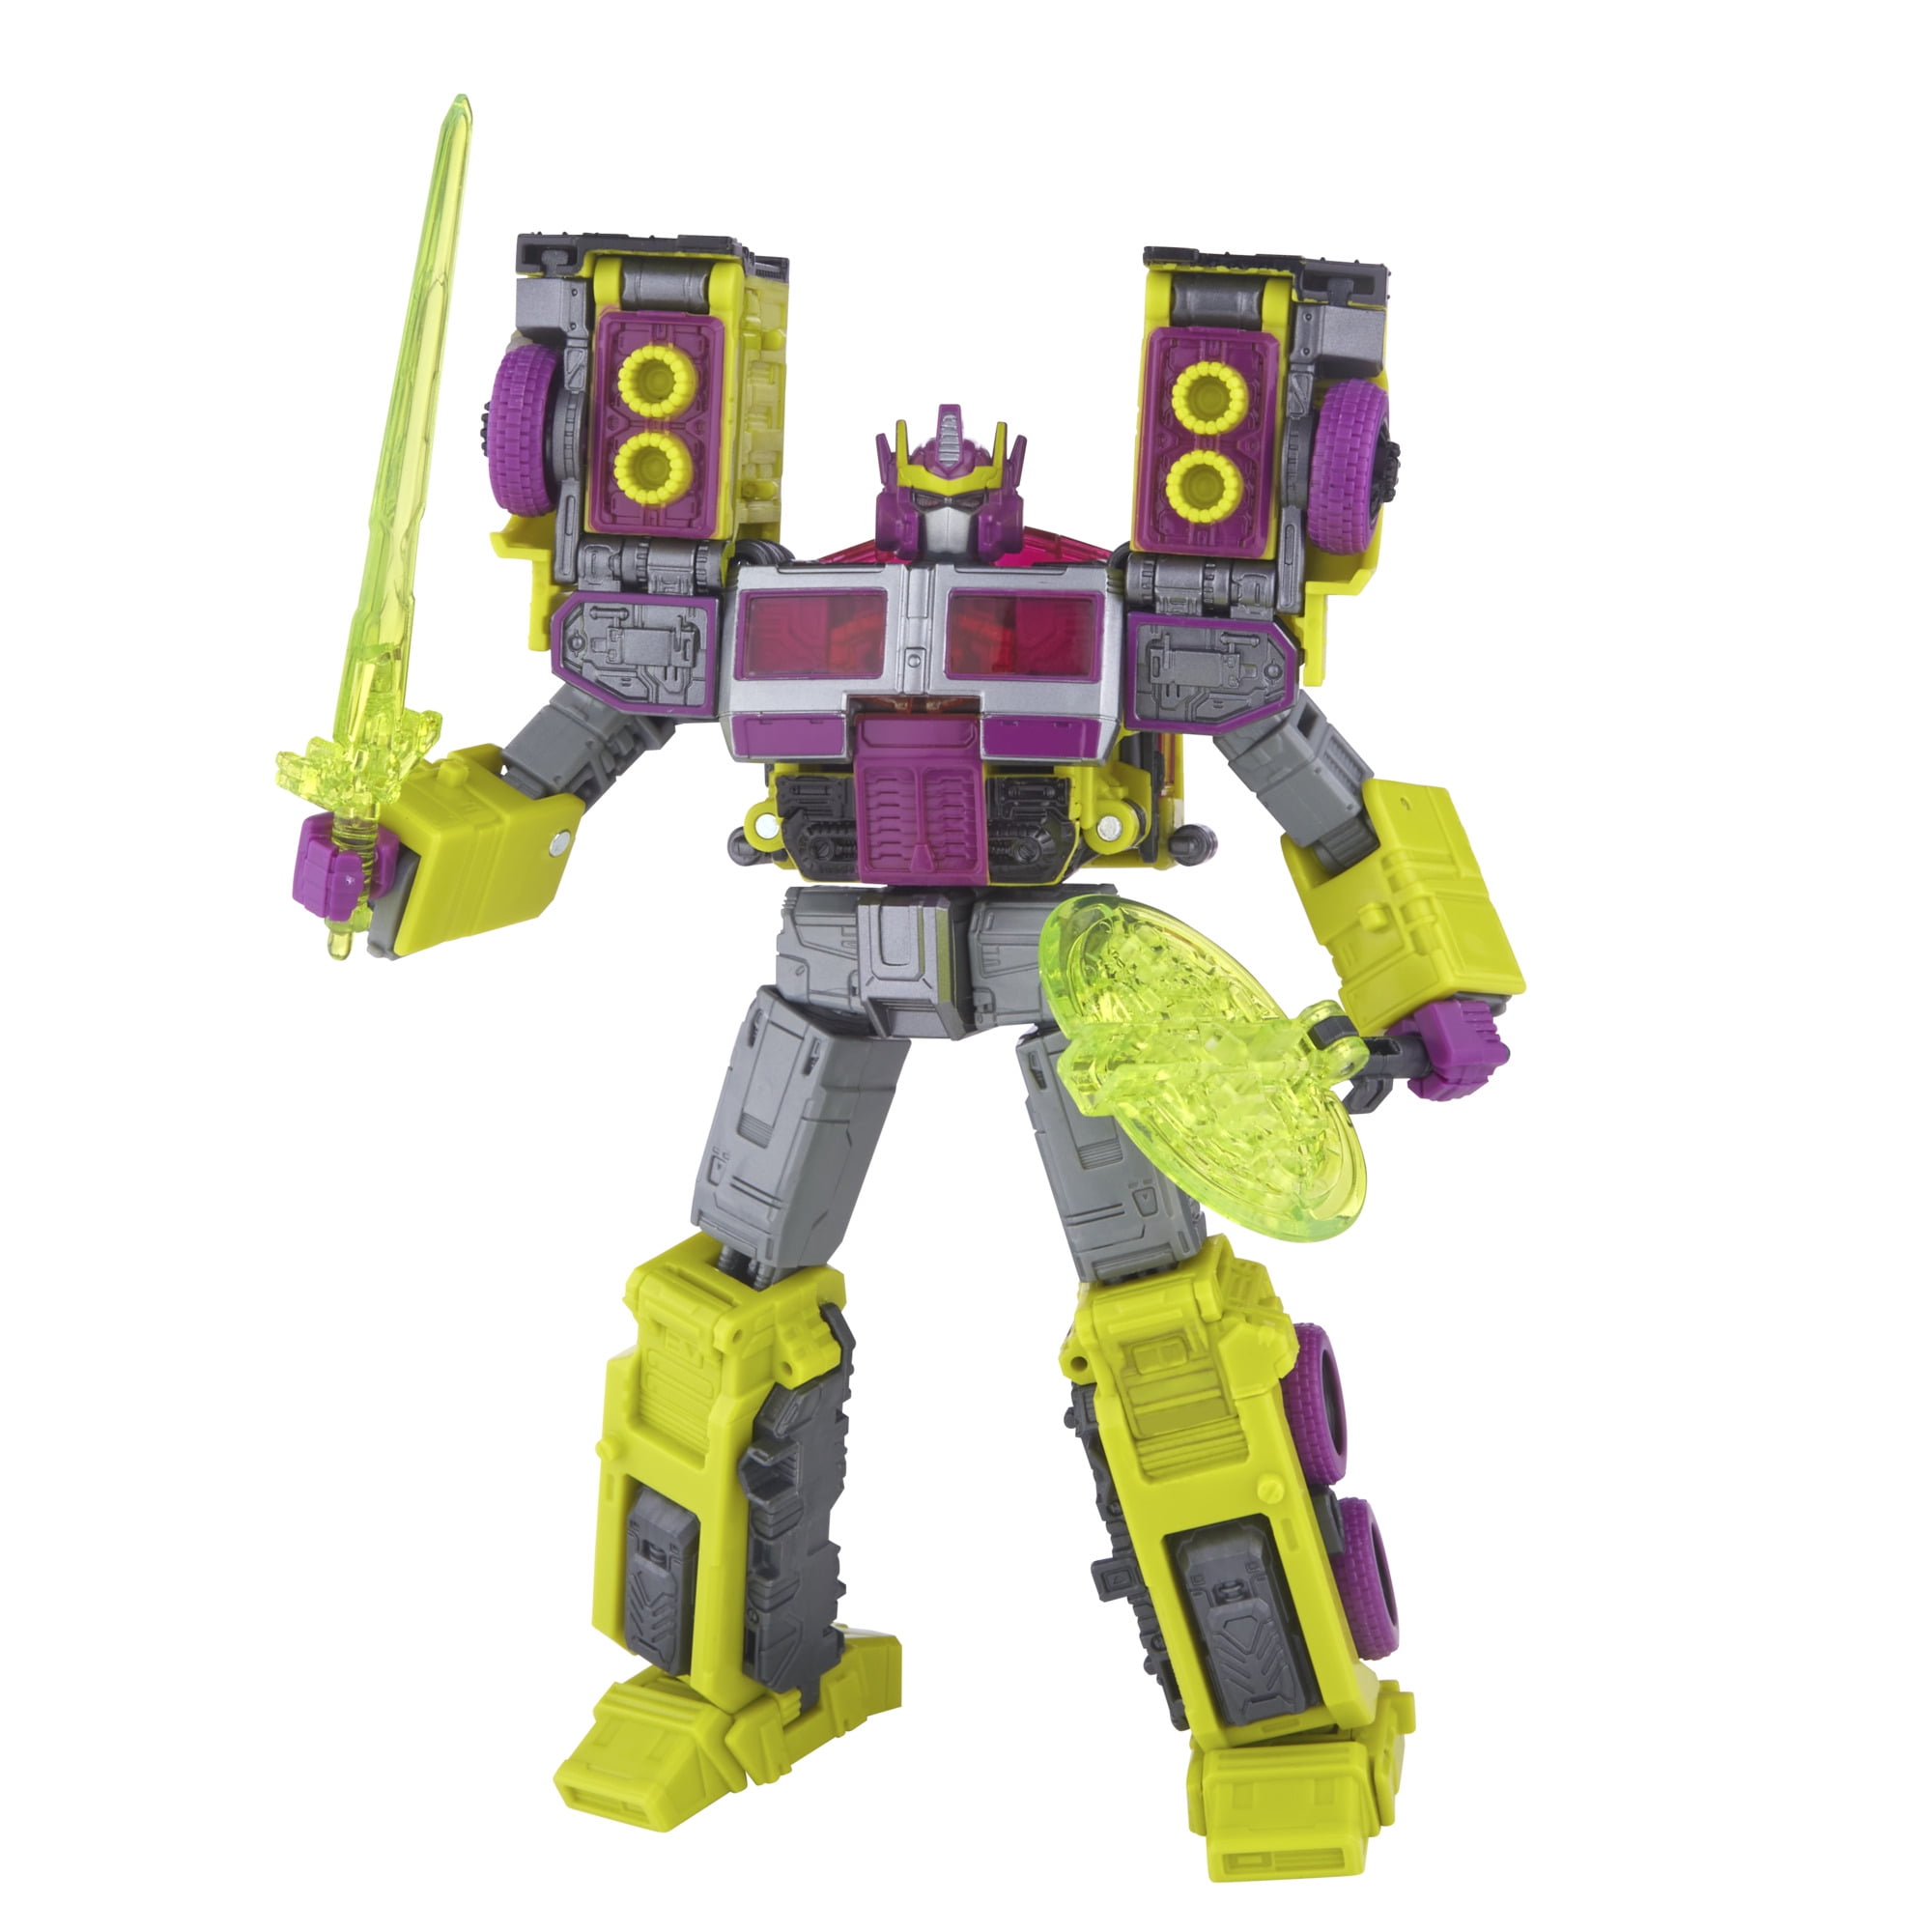 Transformers: Legacy Evolution G2 Universe Toxitron (Walmart Exclusive) 11" Action Figure $35.50 + Free Shipping